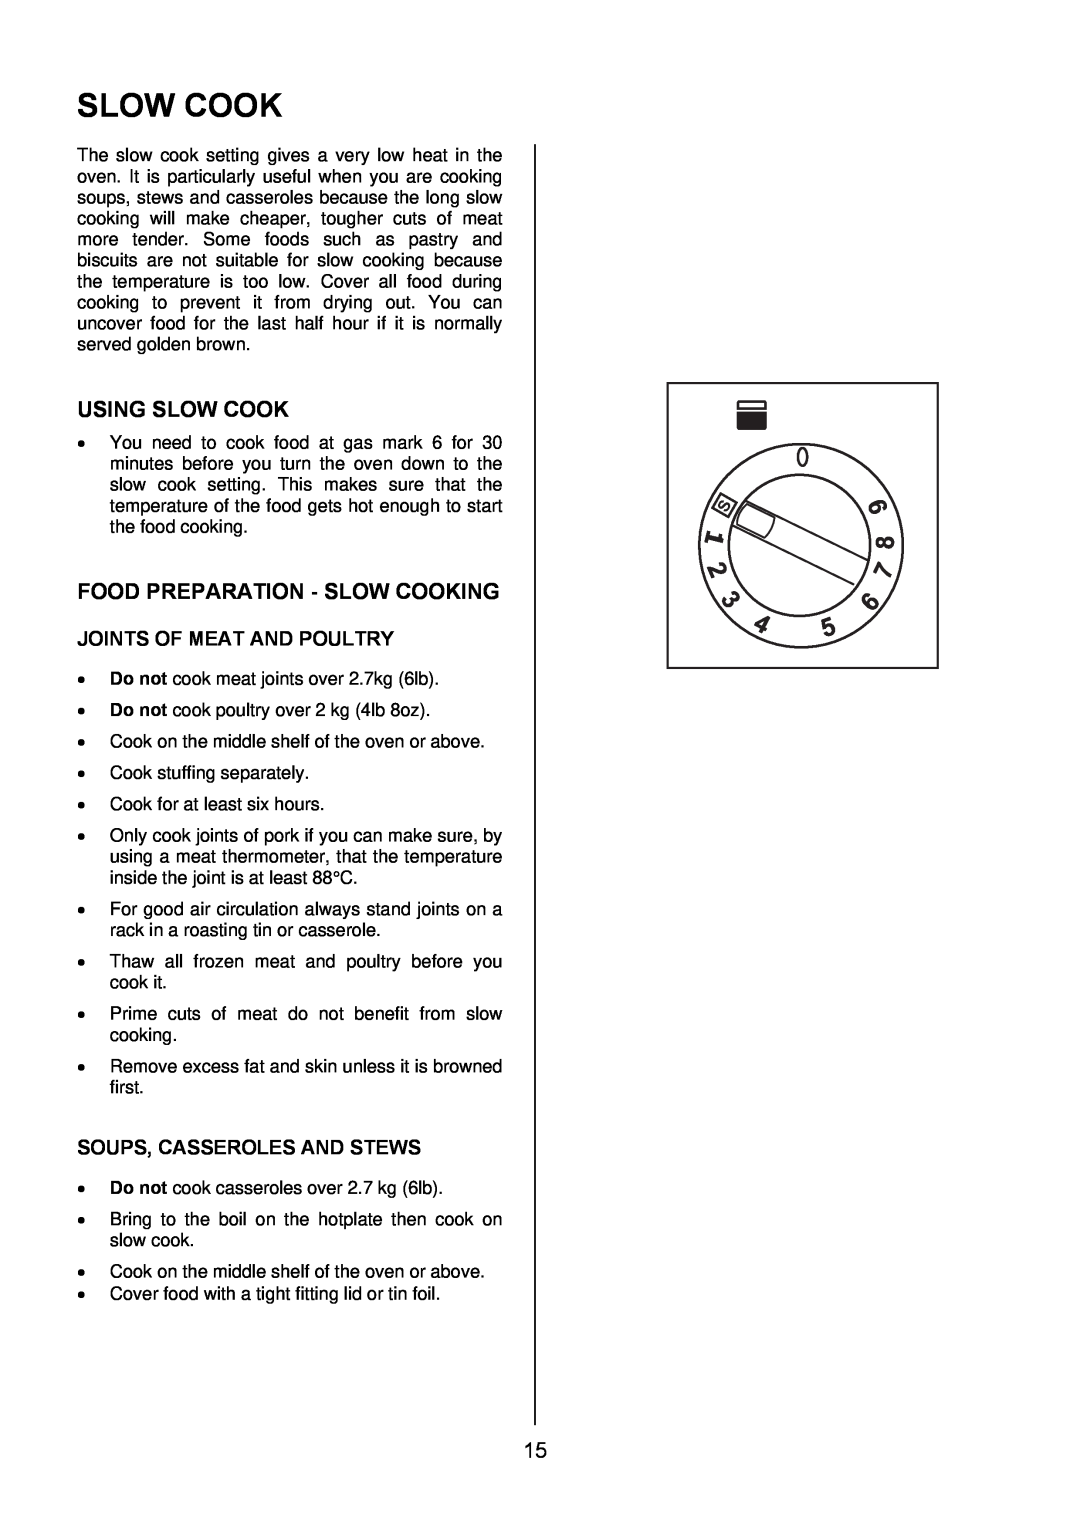 Electrolux EKG5542, EKG5543 manual Using Slow Cook, Food Preparation - Slow Cooking, Joints Of Meat And Poultry 